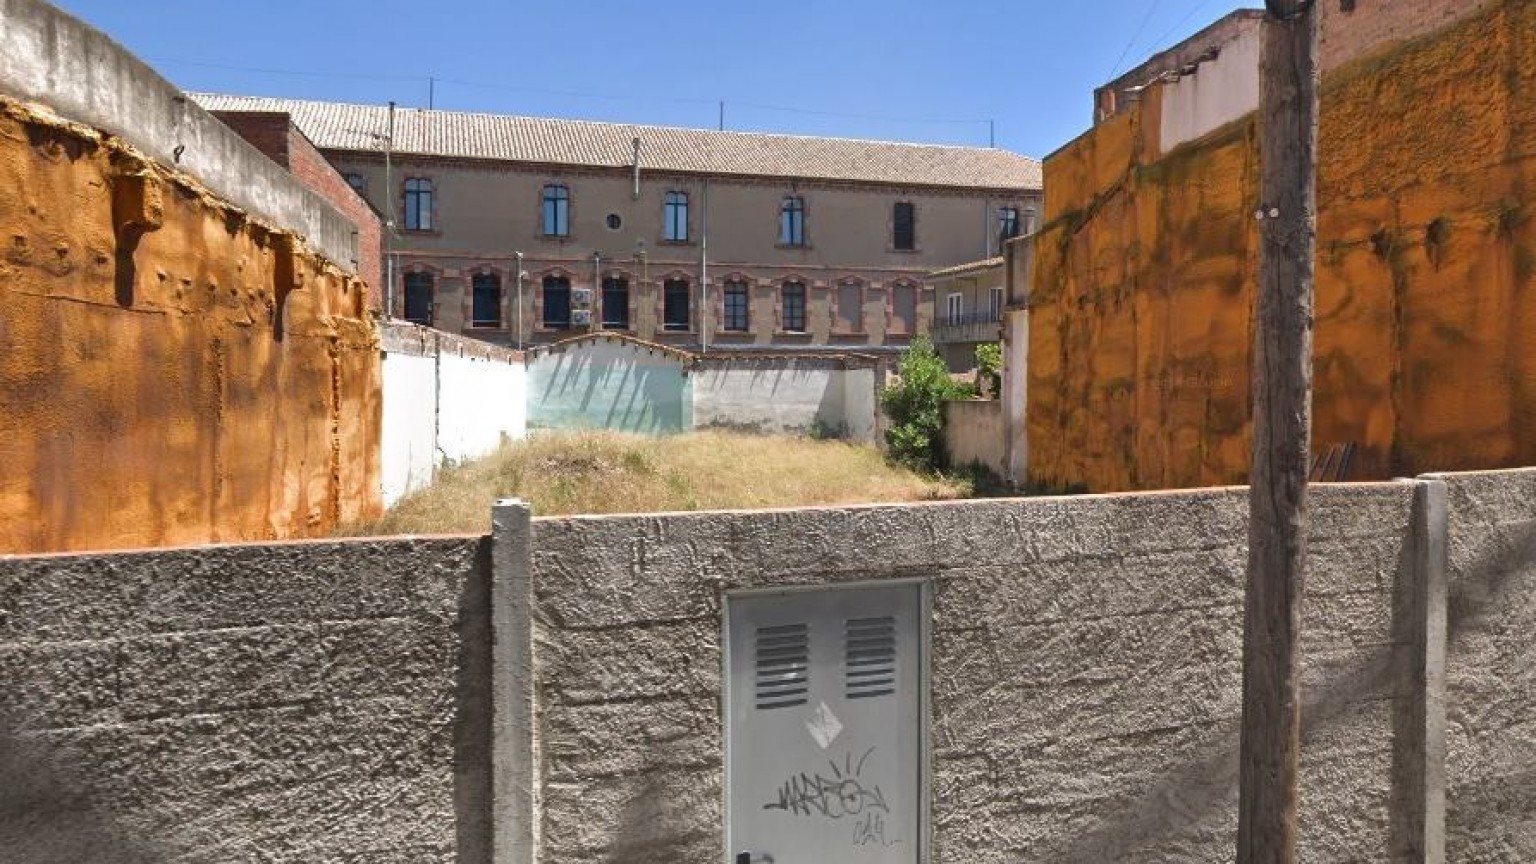 Land for sale for building multi-family houses, sup.498,75m², in Figueres.